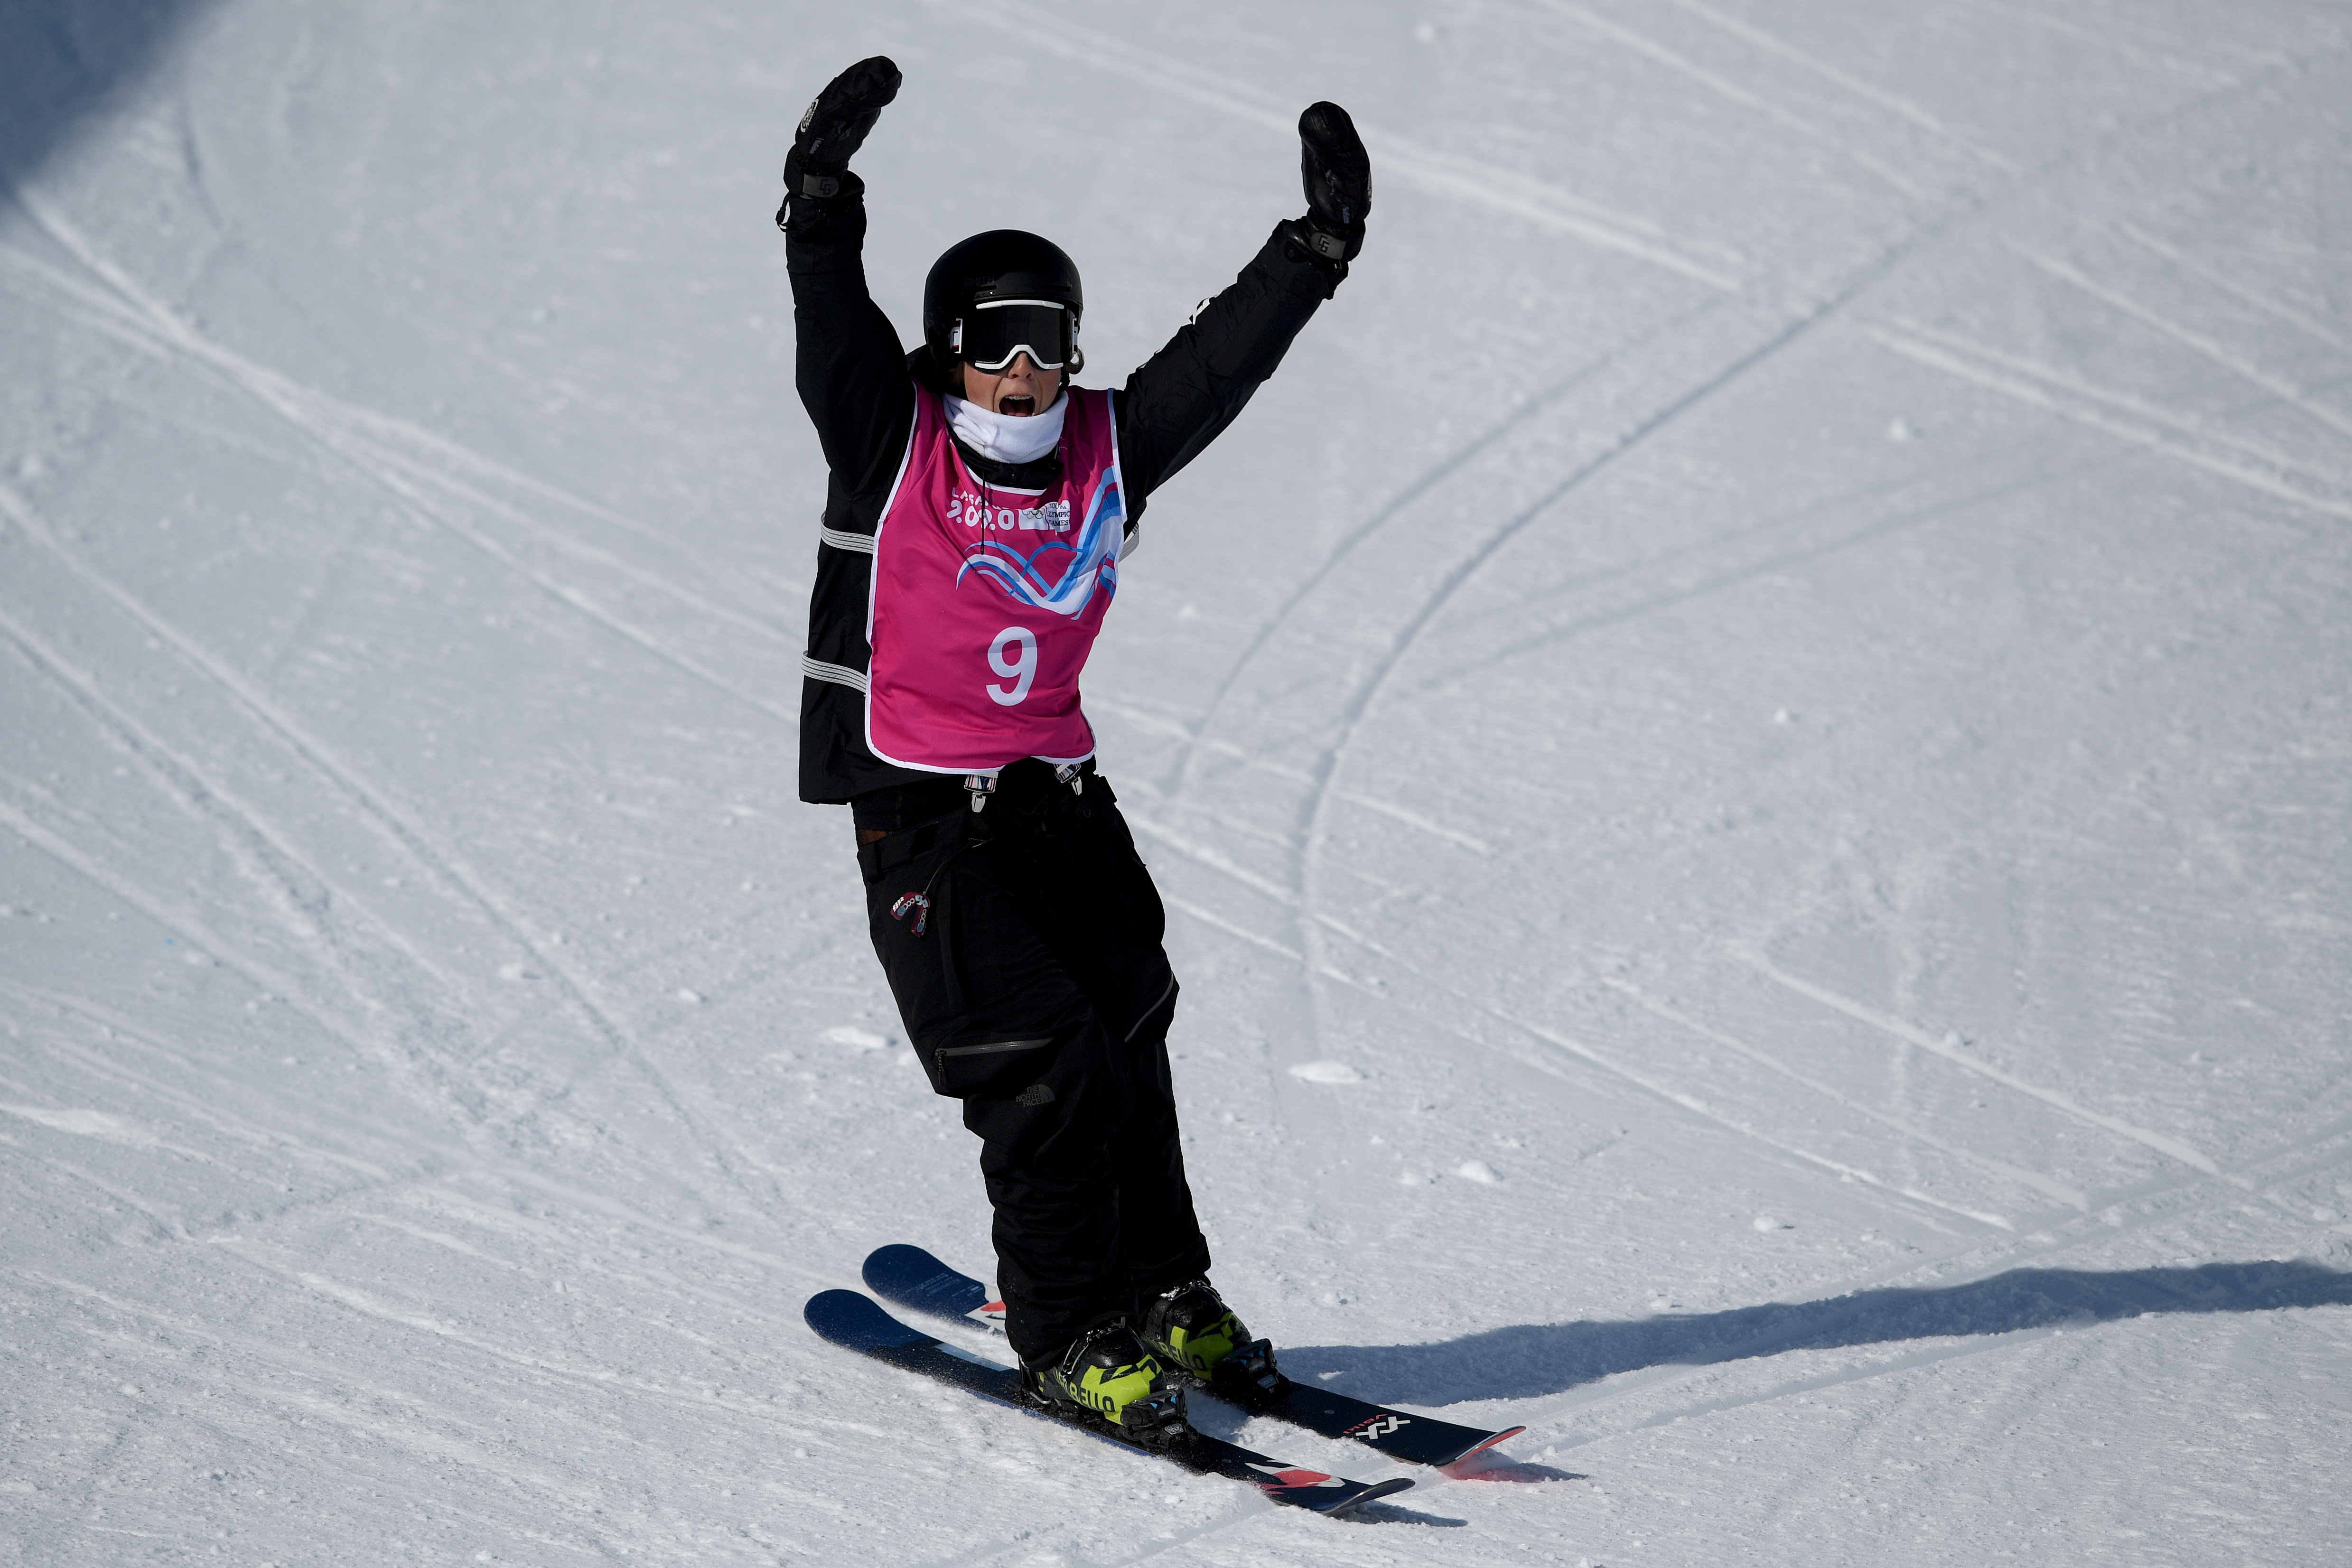 Luca Harrington wins bronze for New Zealand at the Winter Youth Olympic